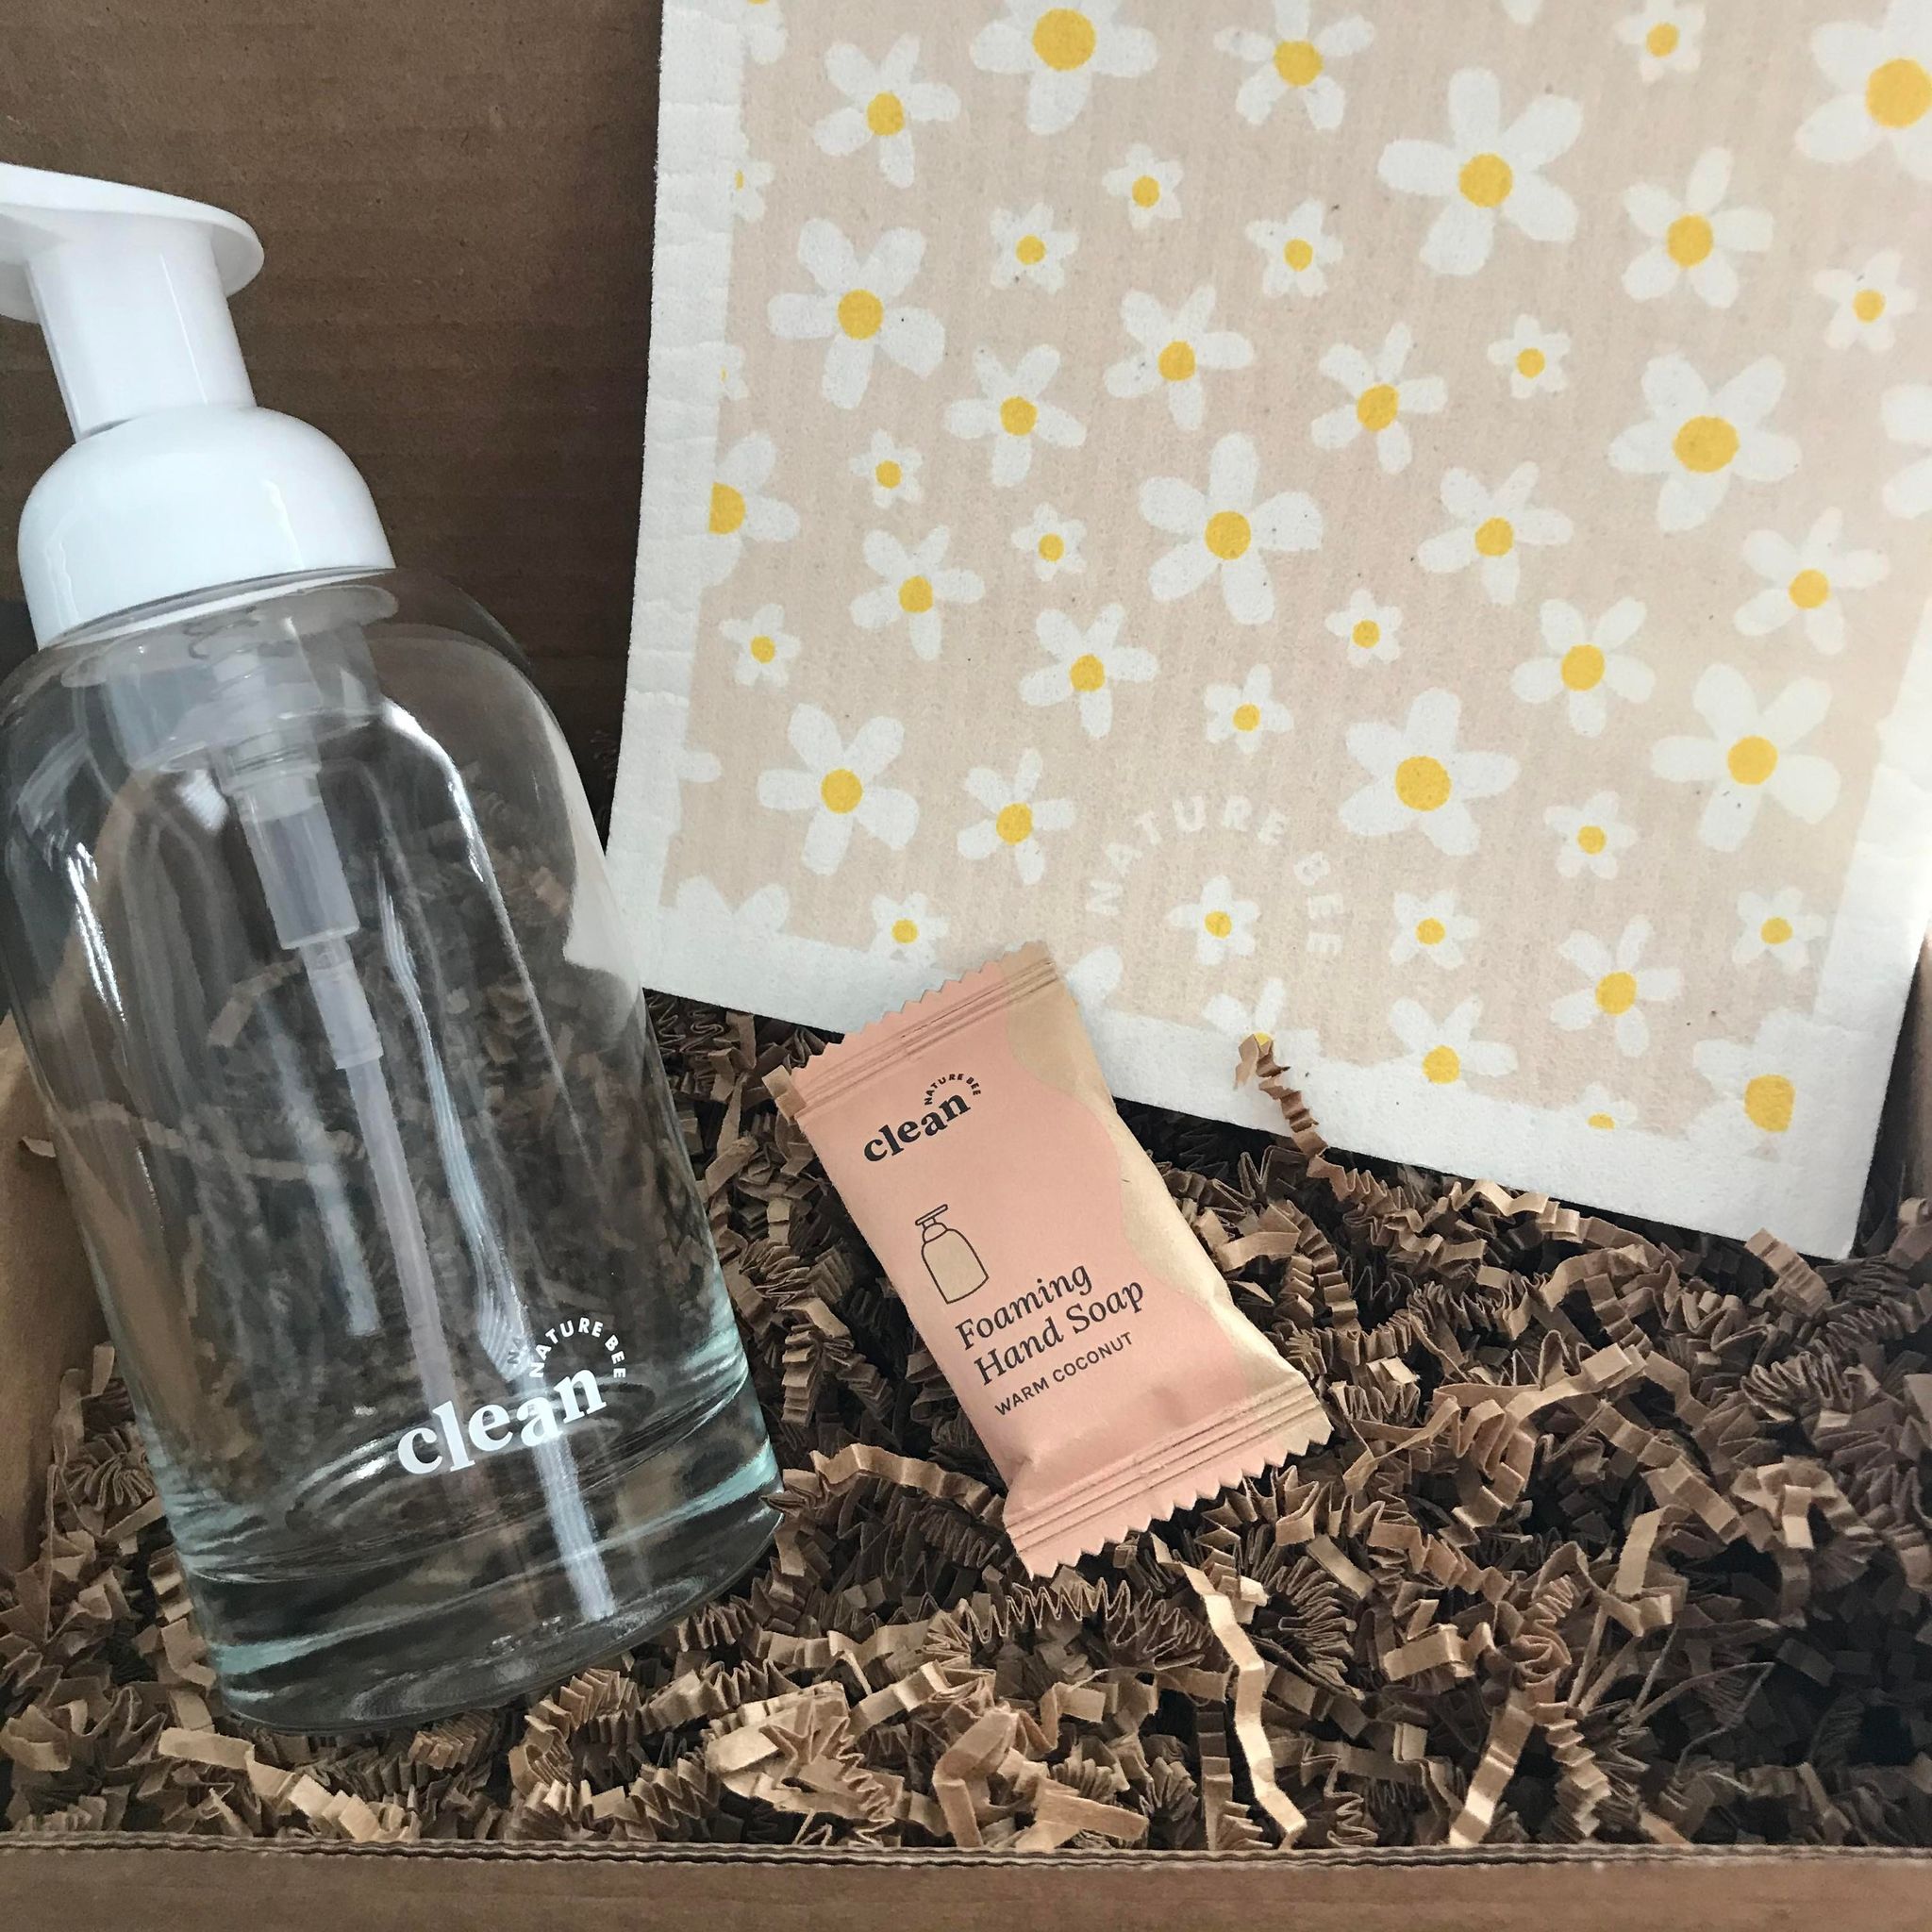 Included in this warm coconut hand soap kit is Swedish sponge cloth in a white daisy pattern, a foaming hand soap tablet and a refillable glass soap dispenser.